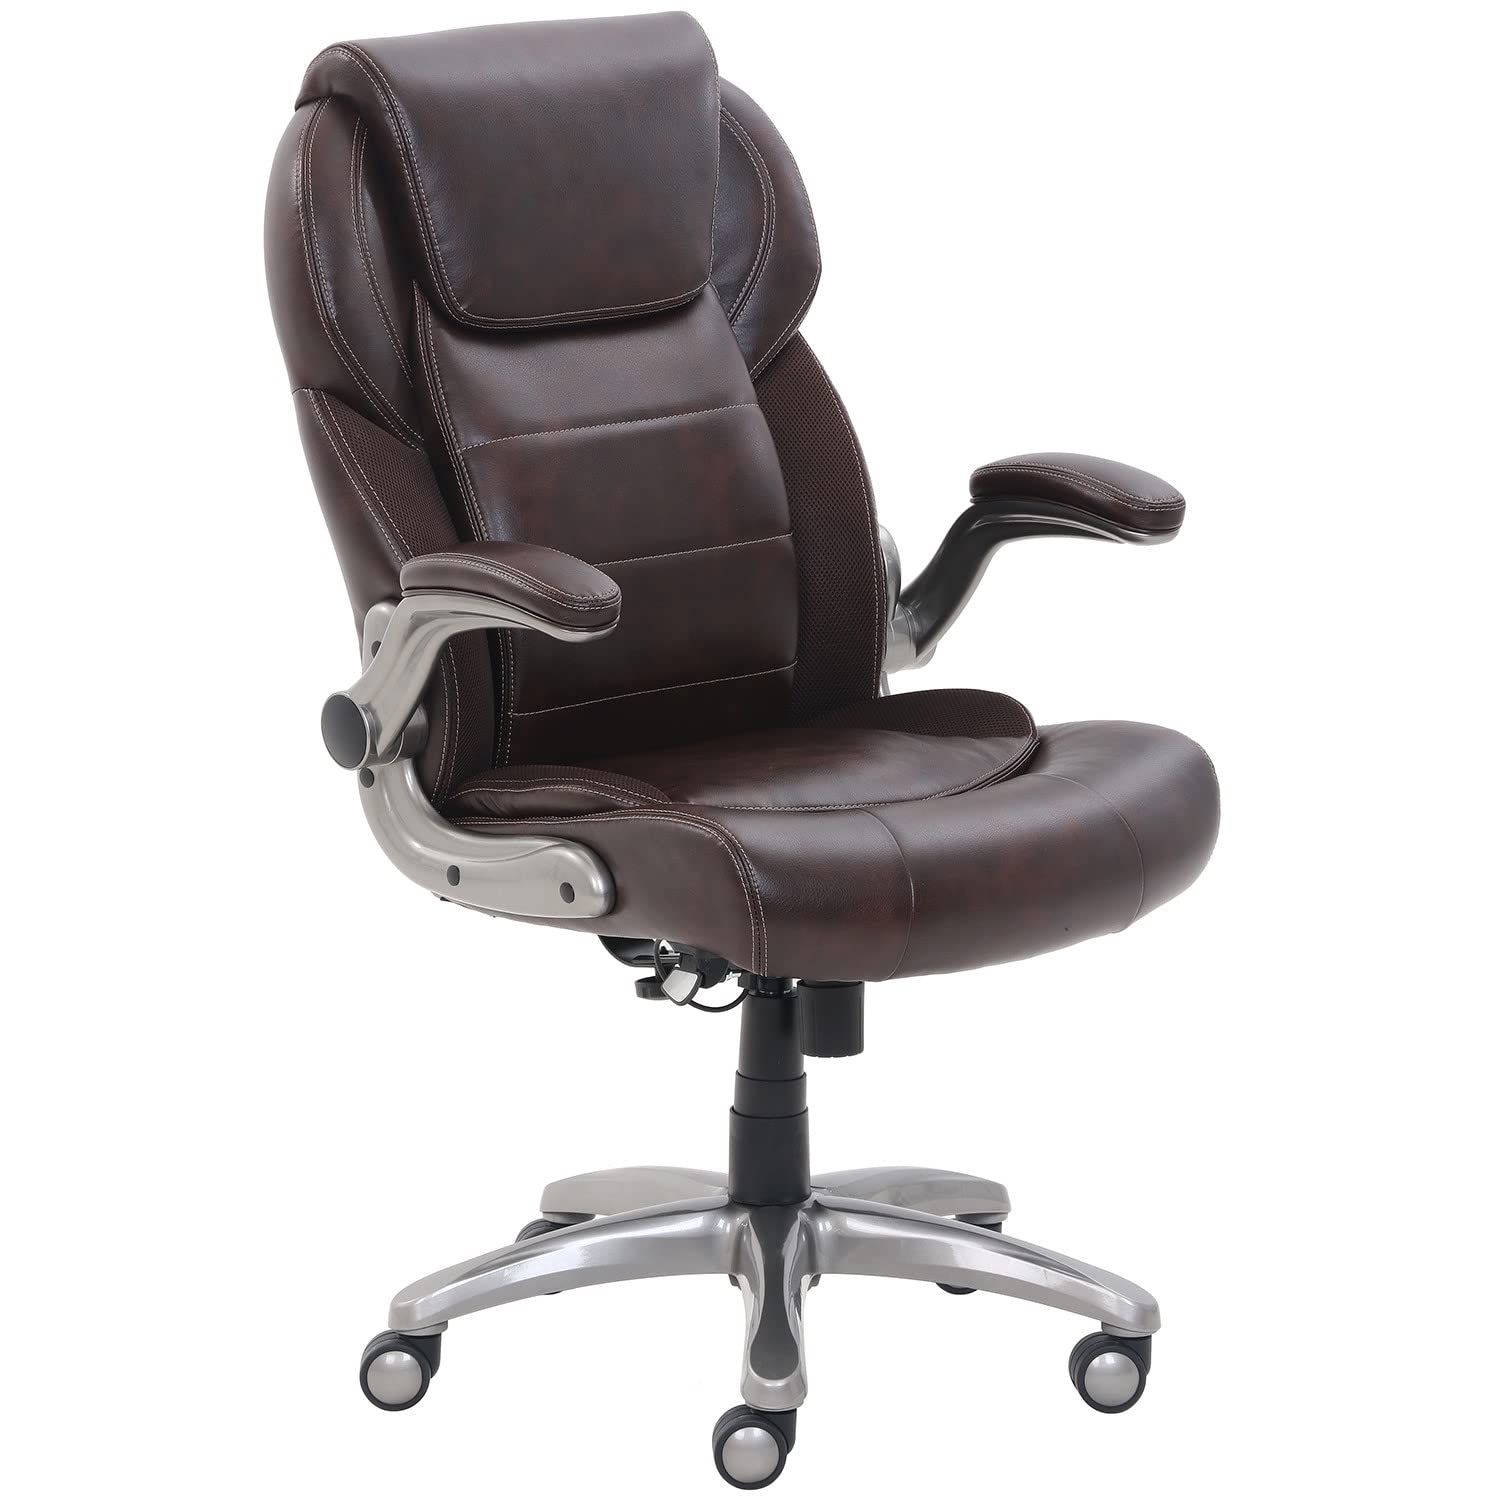 AmazonCommercial Ergonomic High-Back Bonded Leather Executive Chair with Flip-Up Arms and Lumbar Support, Brown $111.98 + Free Shipping